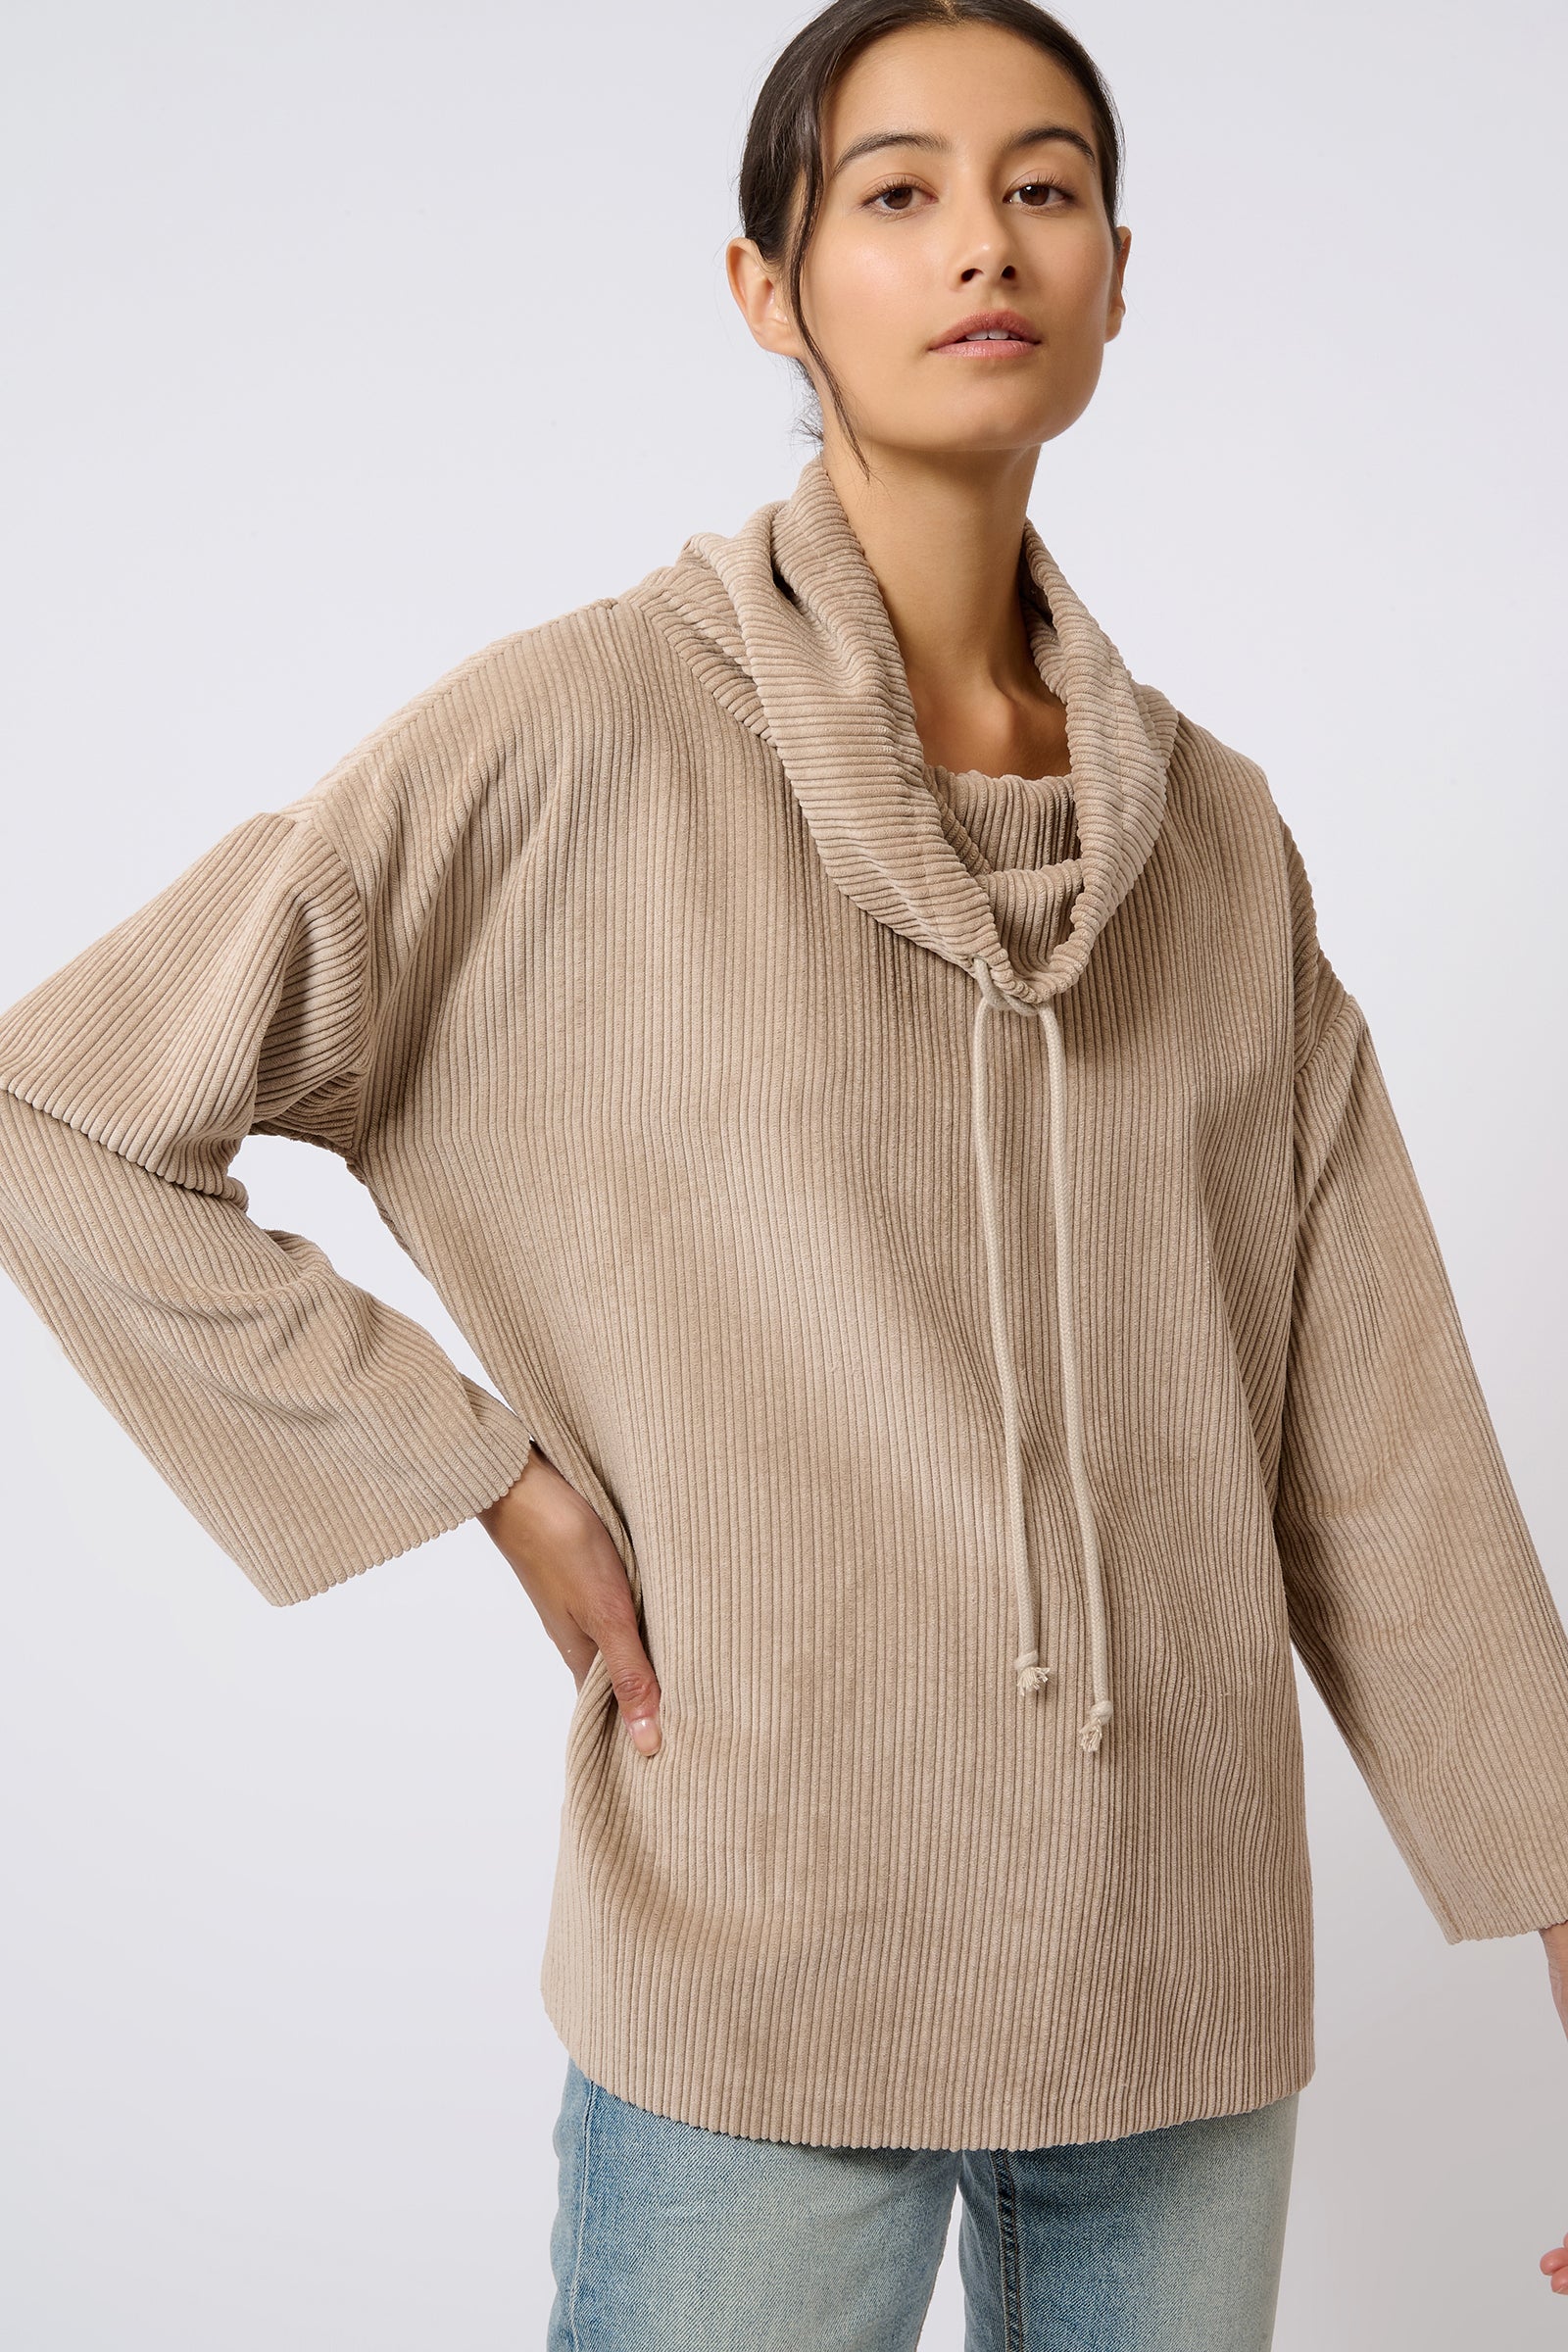 Kal Rieman Debbie Drawstring Pullover in Beige on Model with Hand on Hip Front View